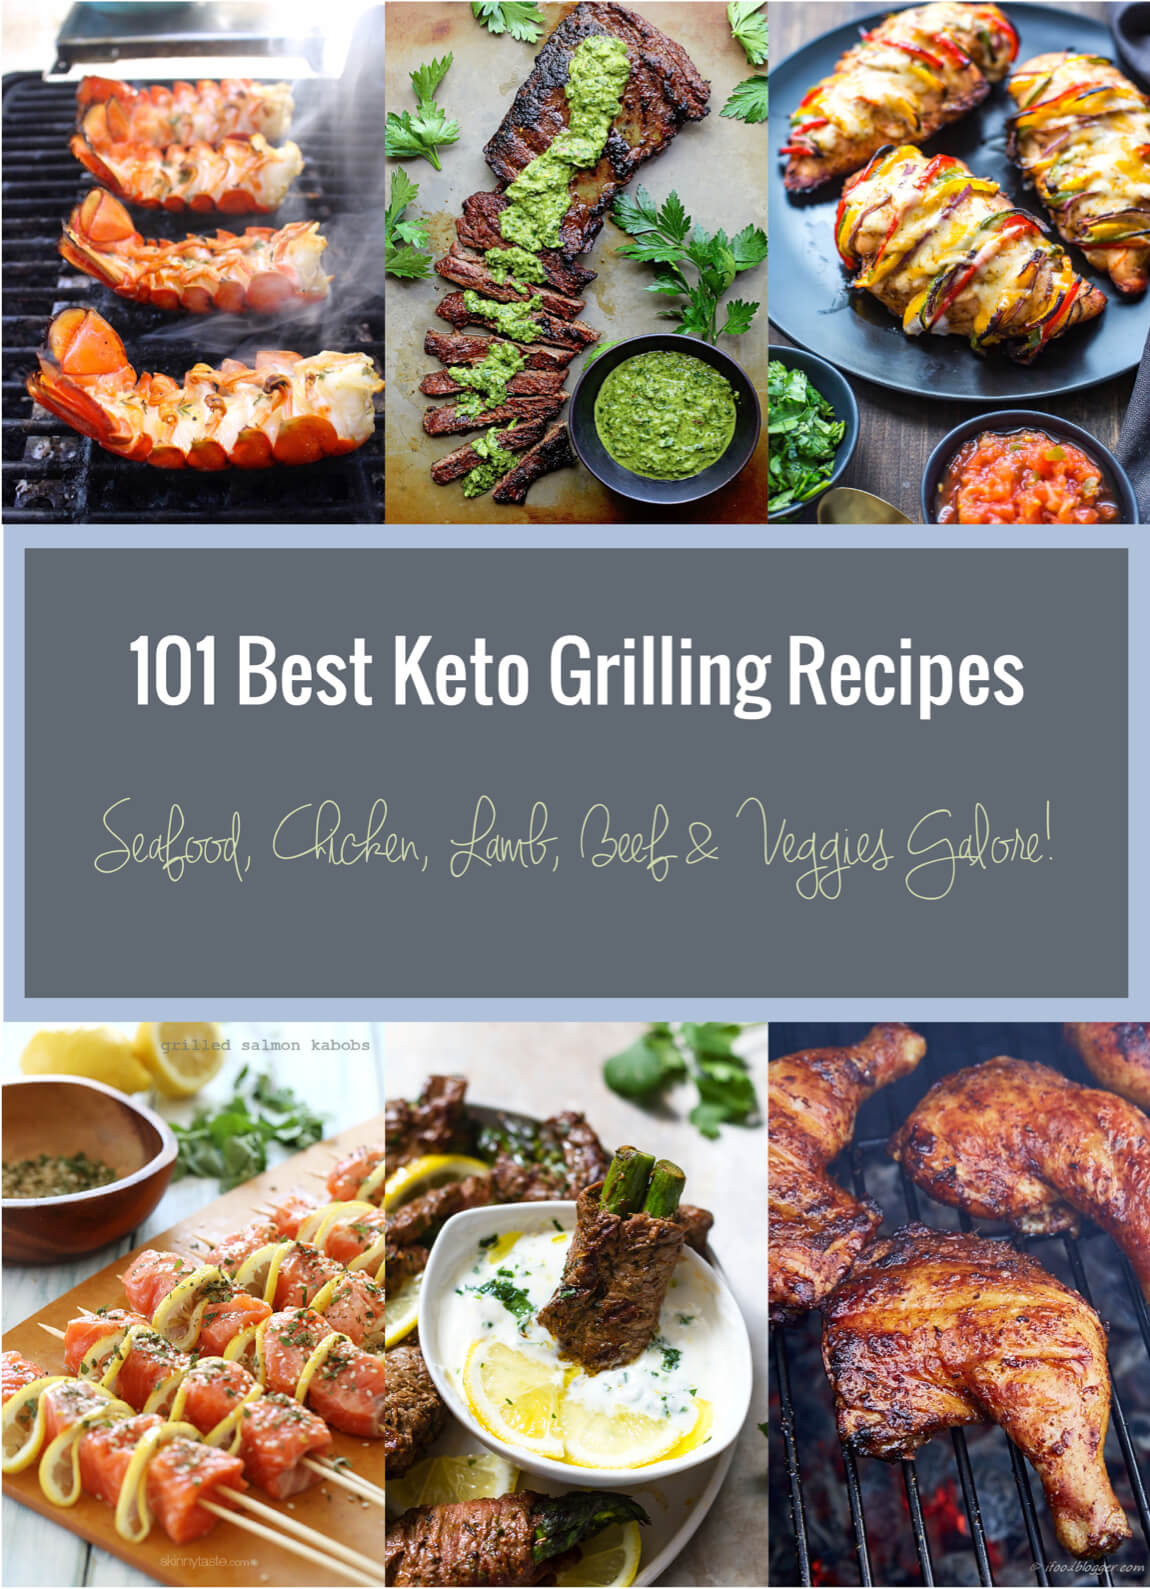 Free Keto Diet Recipes
 101 Best Keto Grilling Recipes Low Carb